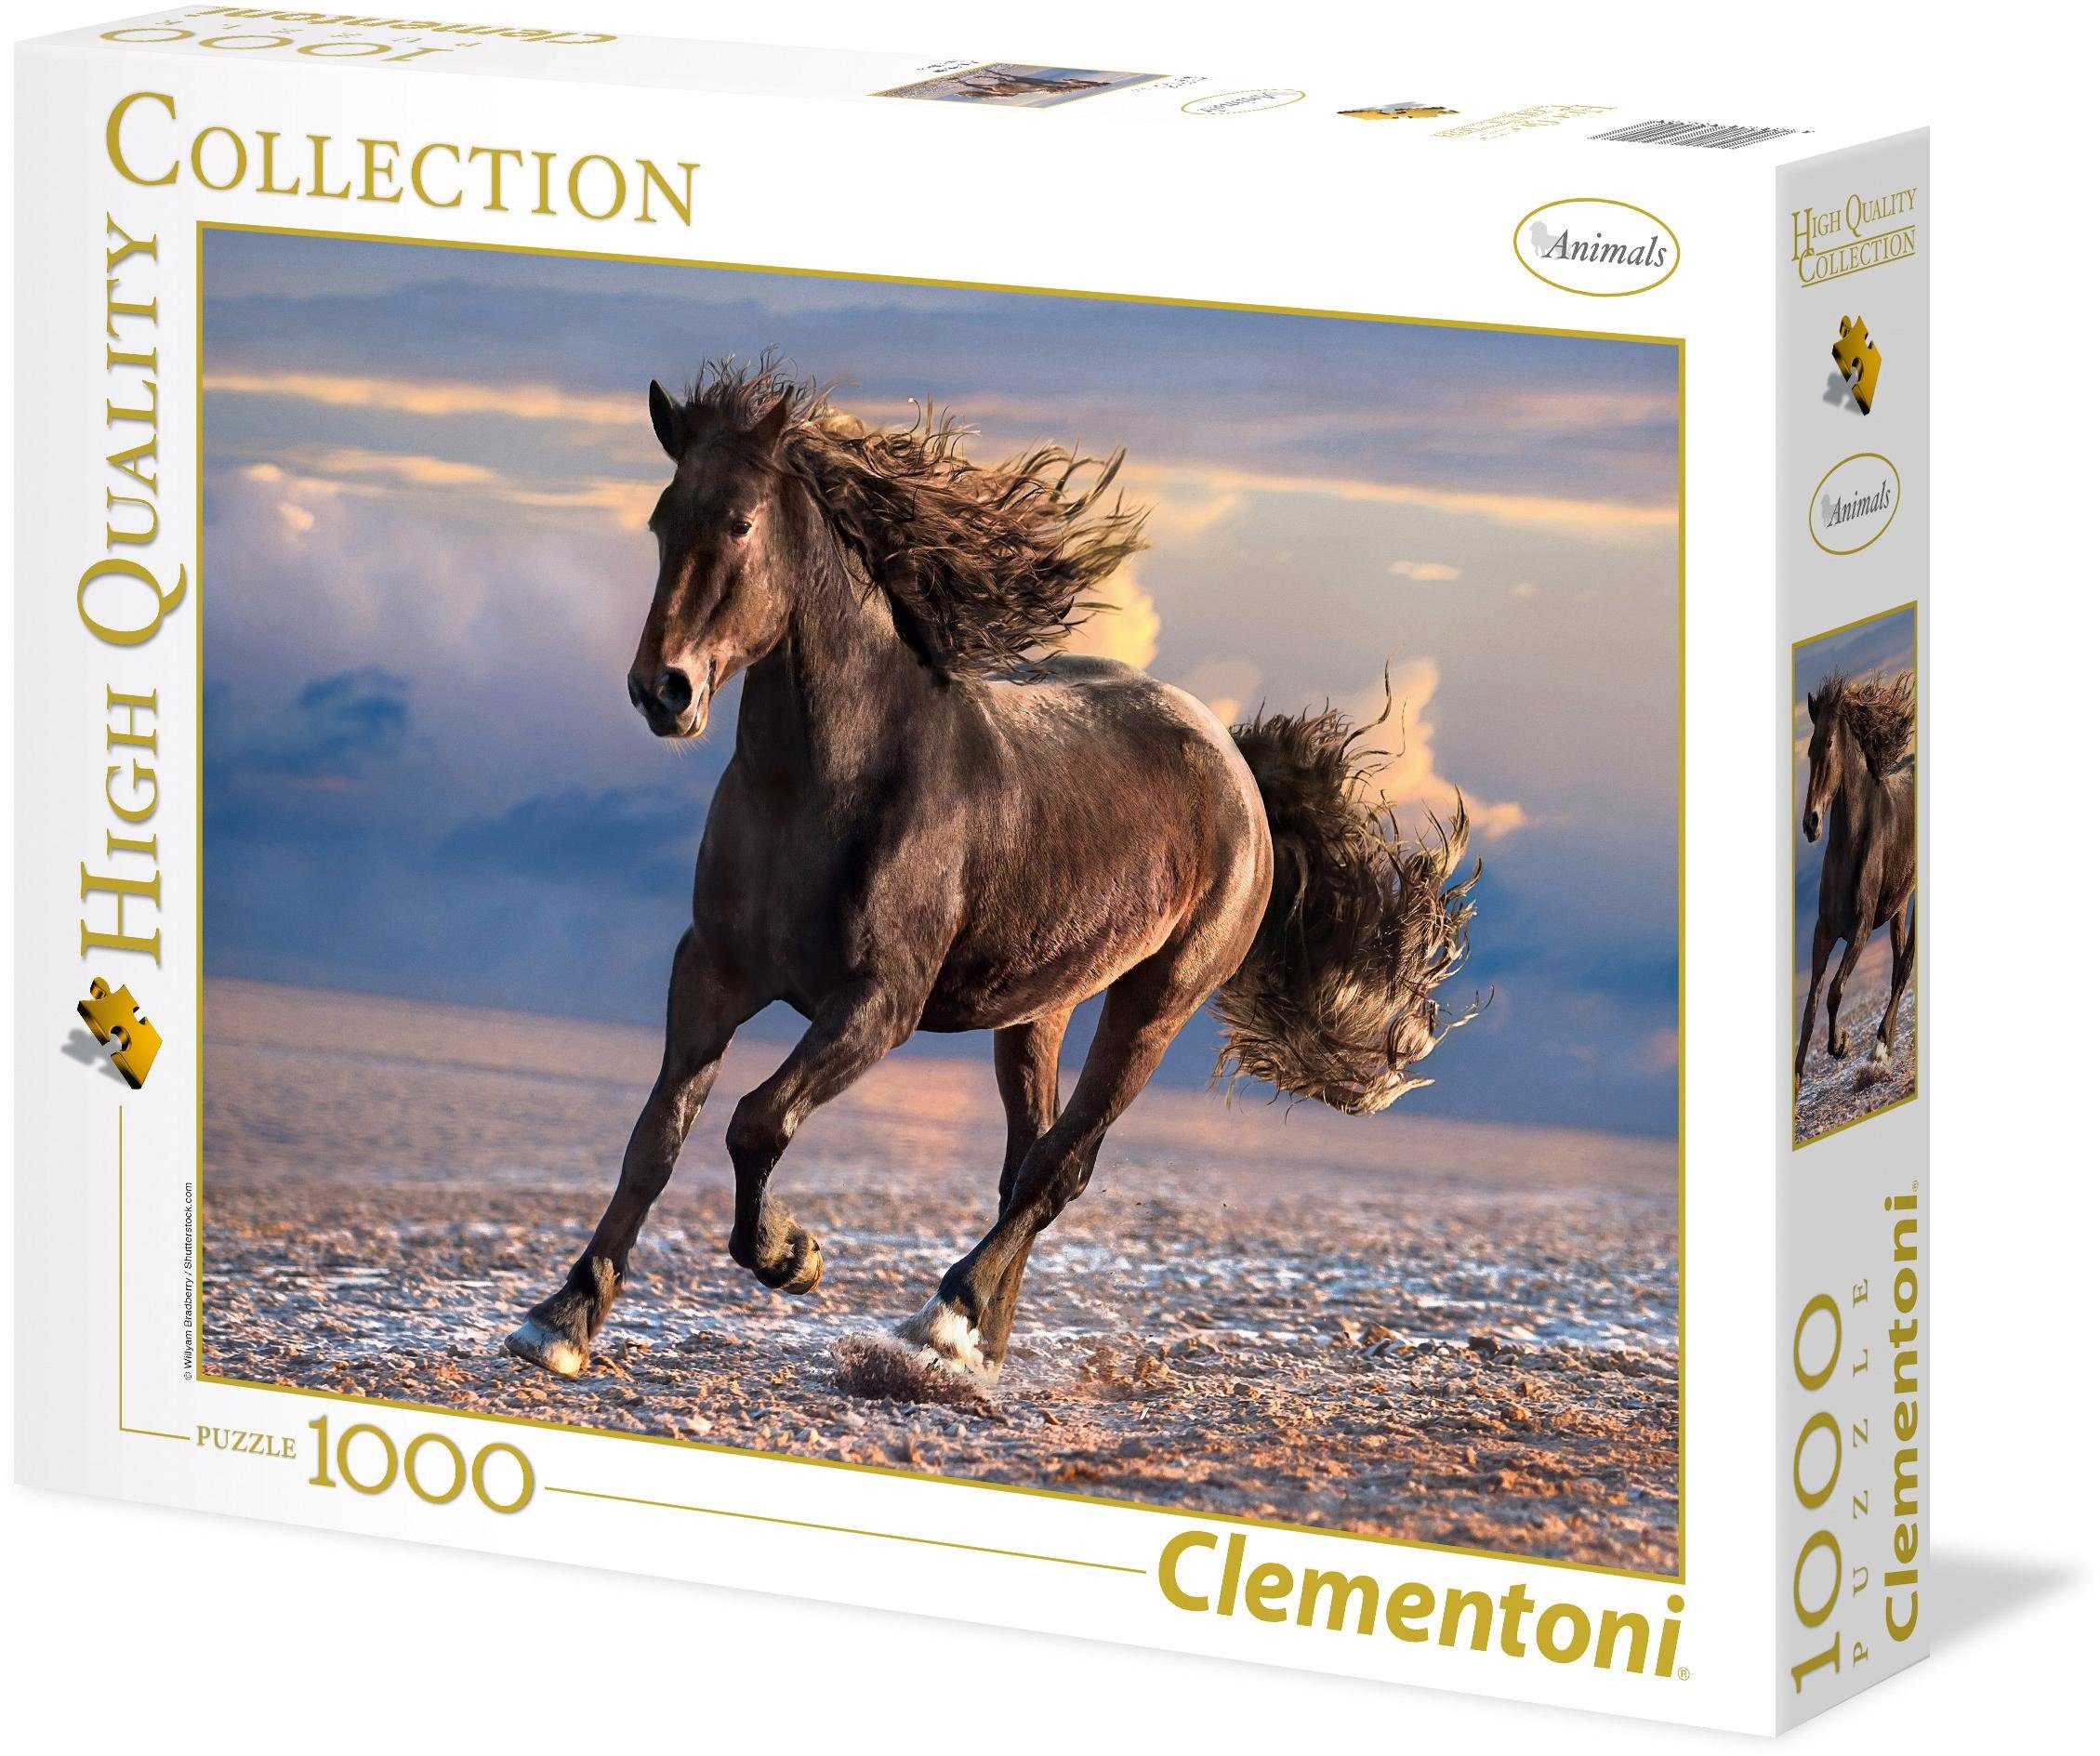 Clementoni® Puzzle High Quality Collection, Europe Puzzleteile, Made Wildpferd, 1000 in